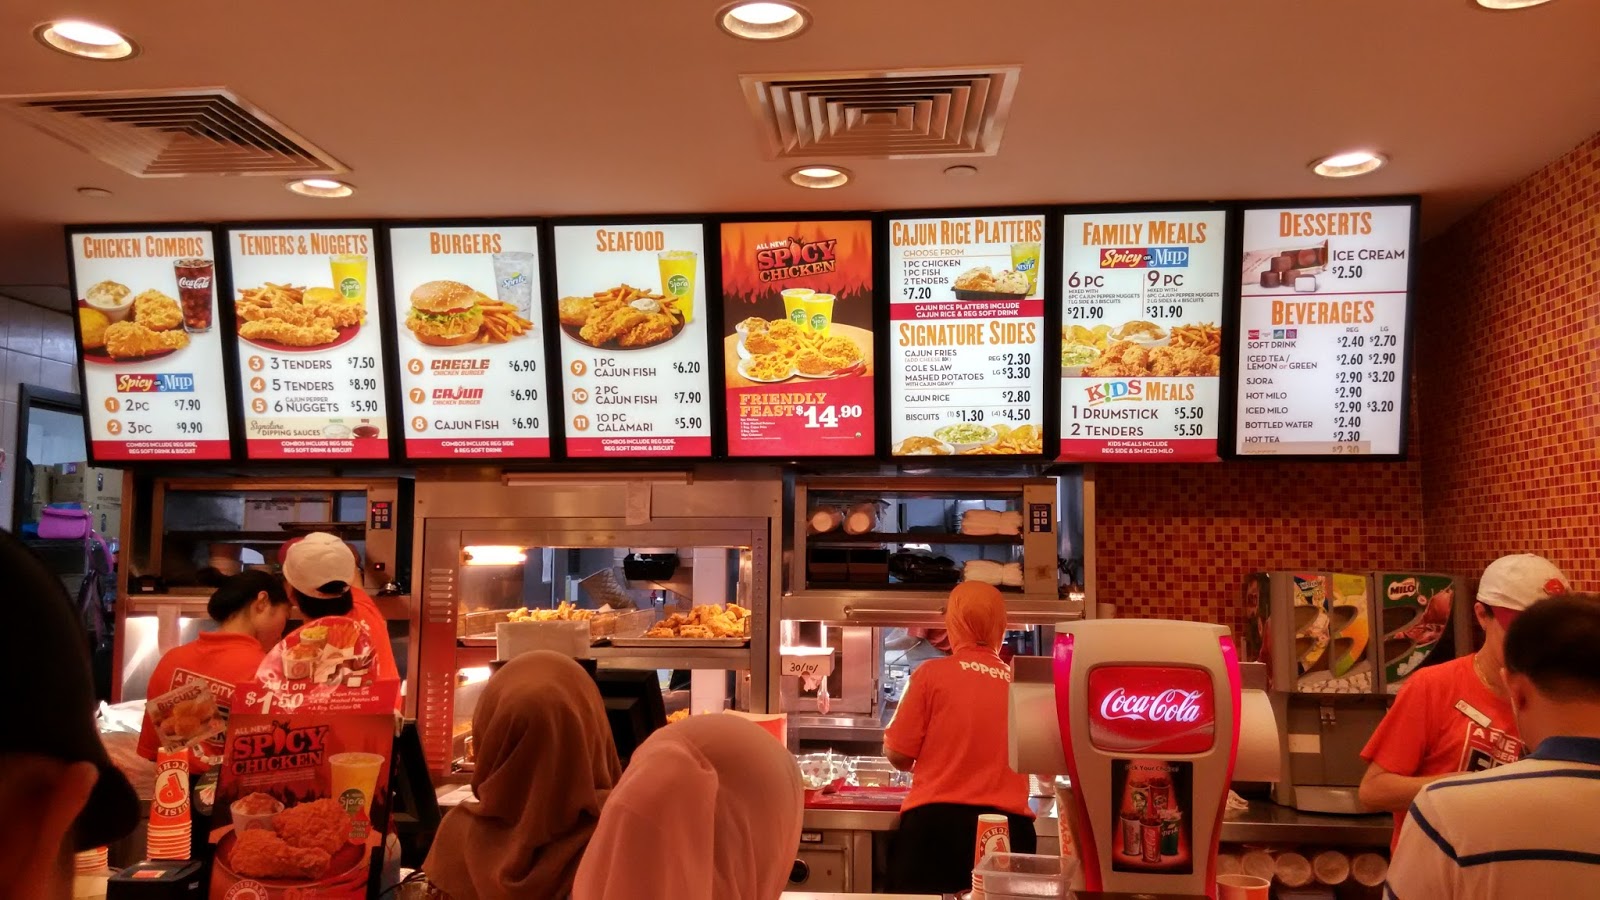 Our Journey : Singapore Tampines MRT - Century Square Mall Popeyes Restaurant